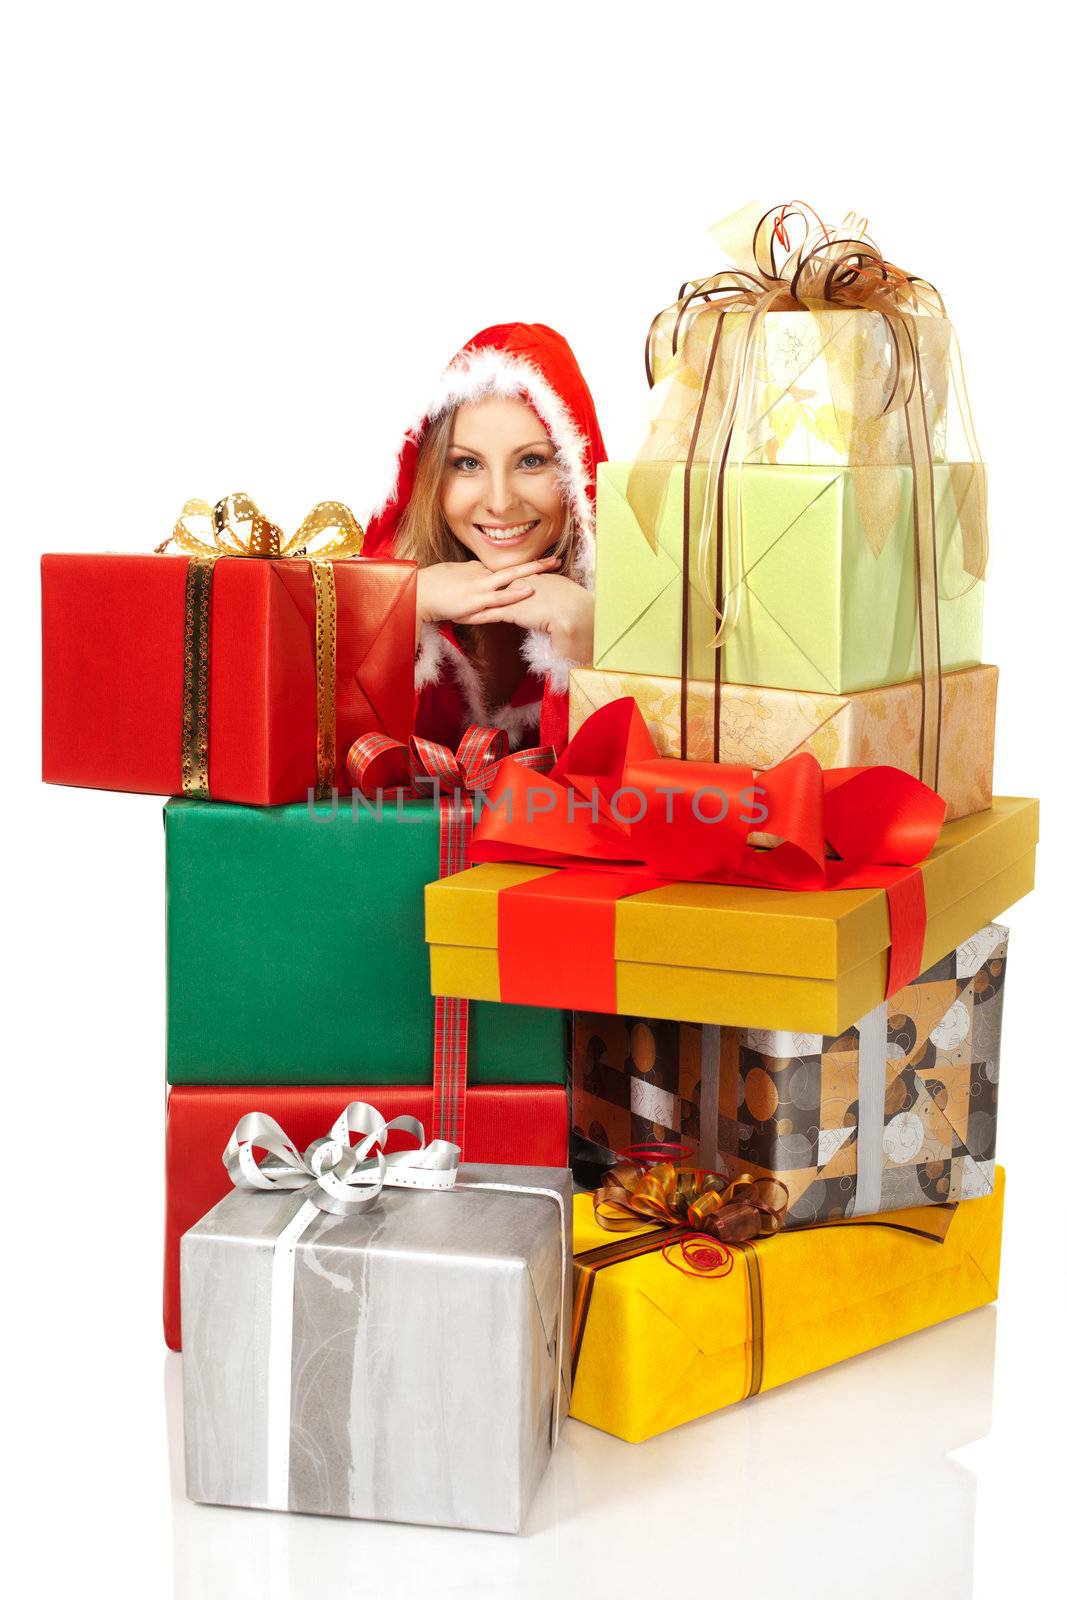 Smiling female with christmas costume smiling at camera behind pile of colorful gift boxes